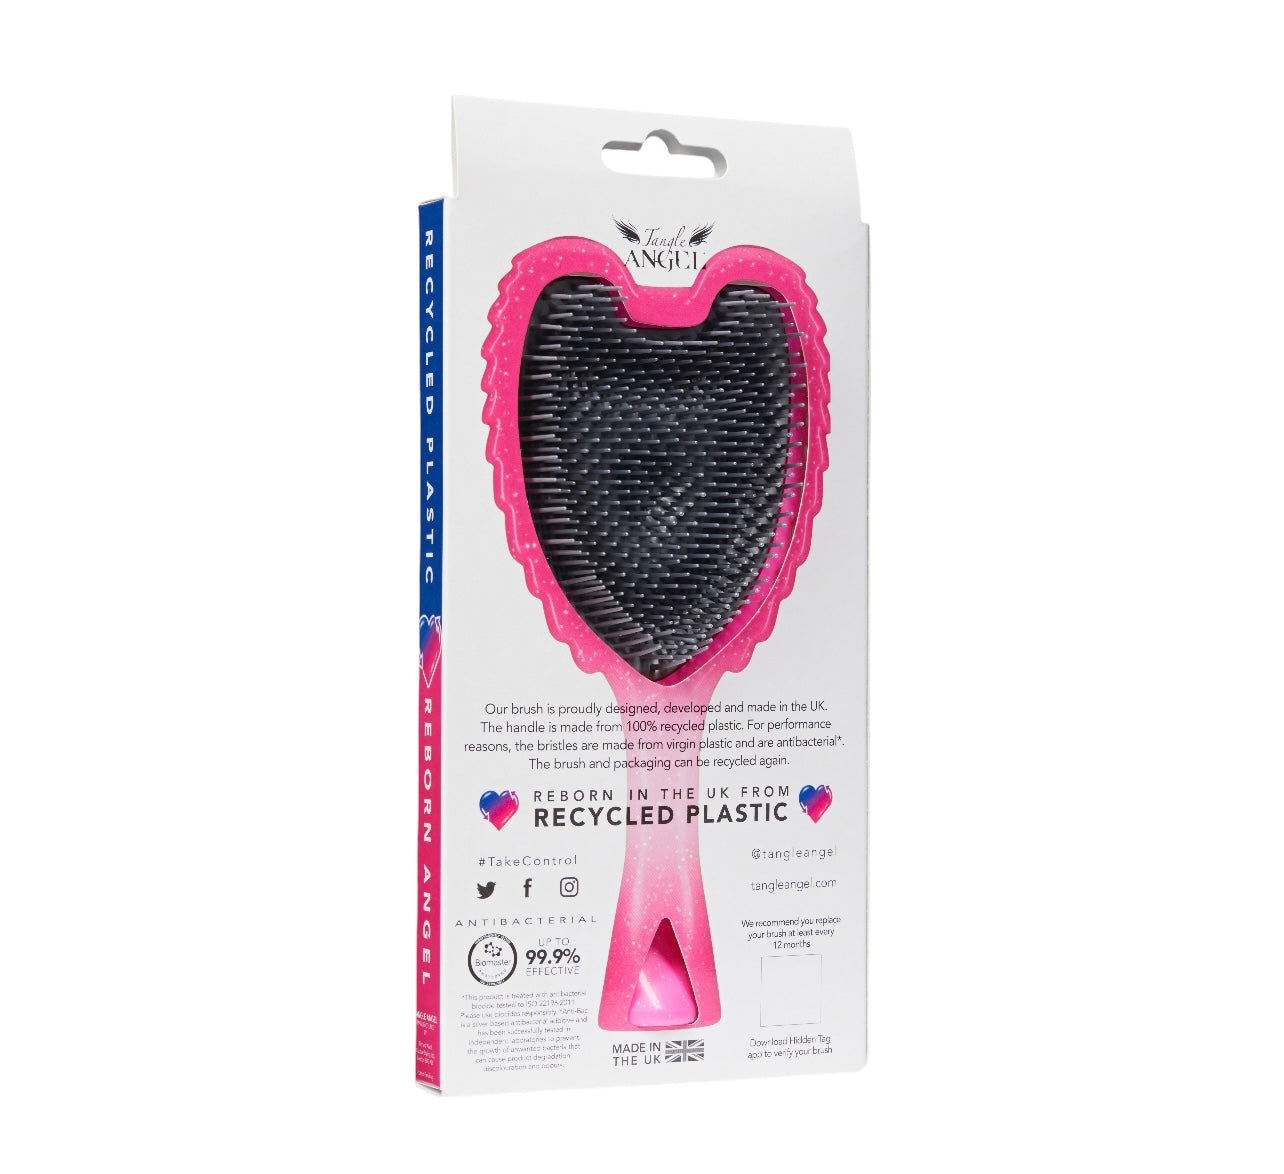 Tangle Angel RE:BORN Pink Sparkle reborn in the UK from recycled plastic, antibacterial hairbrush, love your hair, love your planet Phoenix Nationale